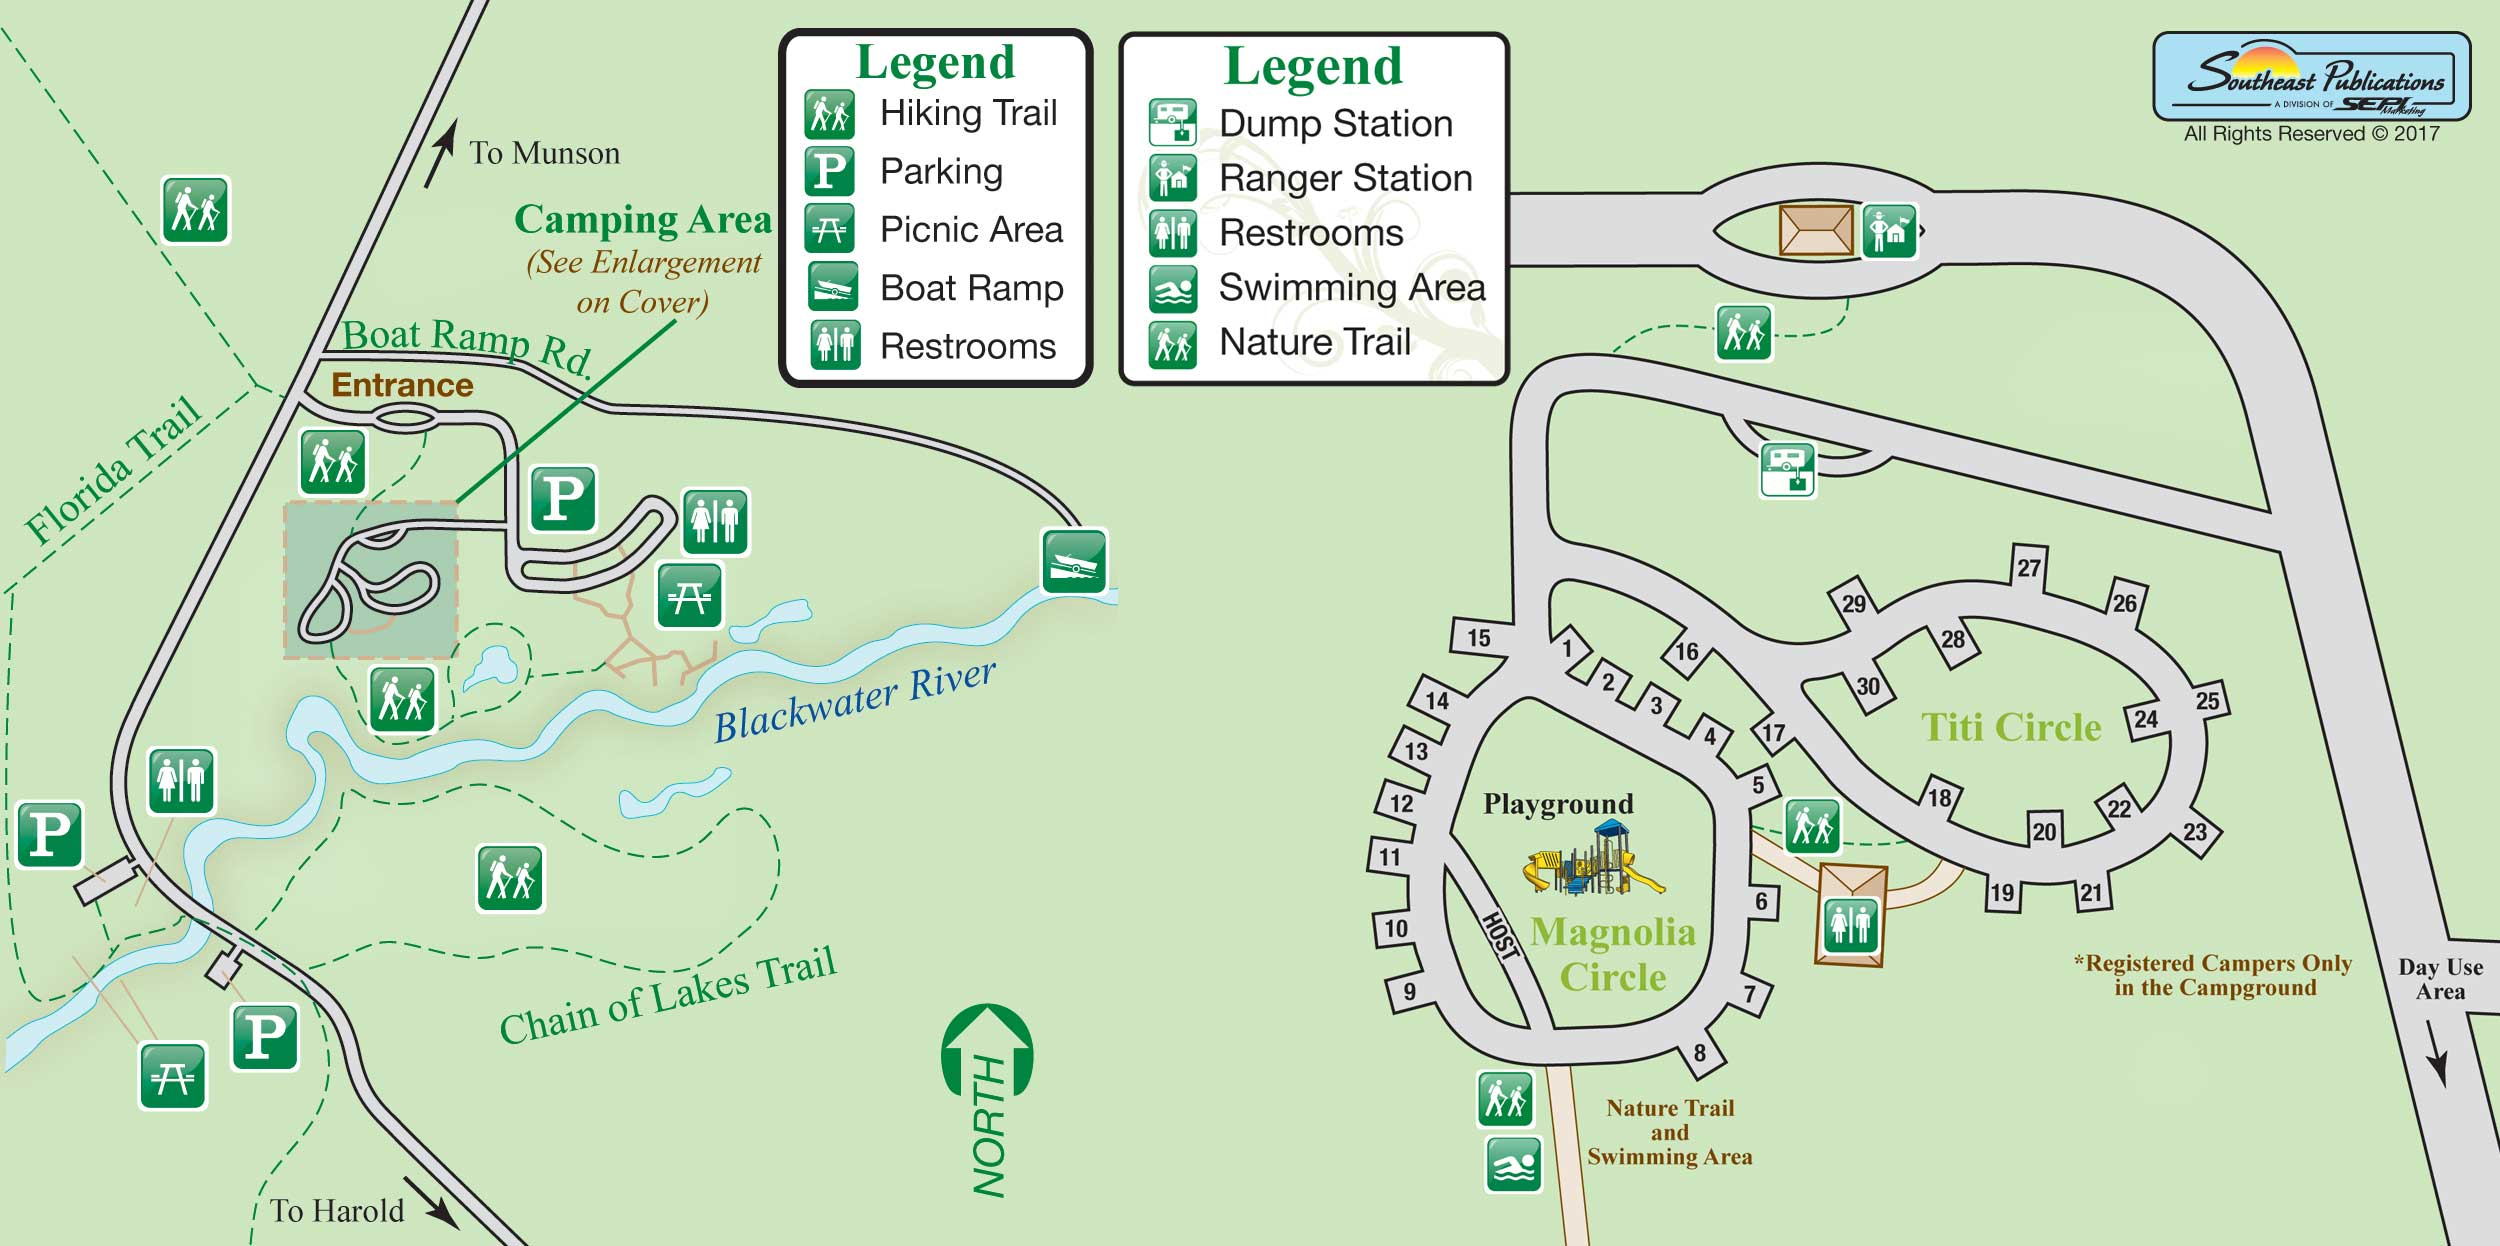 Florida State Parks Rv Camping - Know Your Campground - Florida State Campgrounds Map